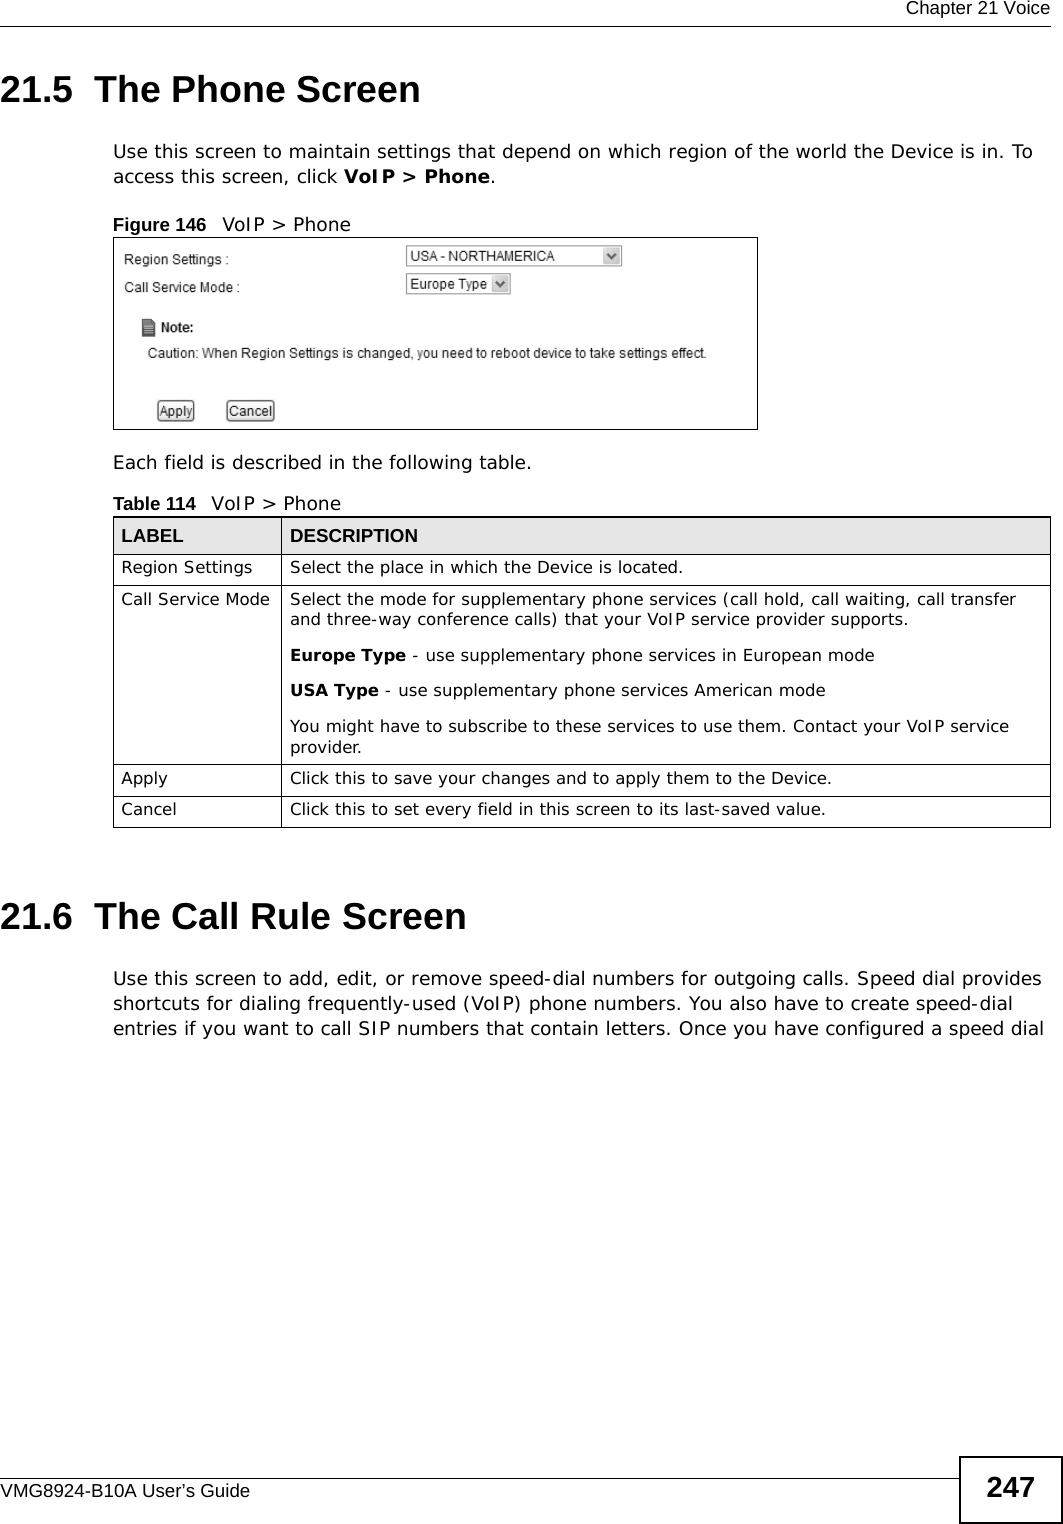  Chapter 21 VoiceVMG8924-B10A User’s Guide 24721.5  The Phone Screen Use this screen to maintain settings that depend on which region of the world the Device is in. To access this screen, click VoIP &gt; Phone.Figure 146   VoIP &gt; Phone Each field is described in the following table.21.6  The Call Rule ScreenUse this screen to add, edit, or remove speed-dial numbers for outgoing calls. Speed dial provides shortcuts for dialing frequently-used (VoIP) phone numbers. You also have to create speed-dial entries if you want to call SIP numbers that contain letters. Once you have configured a speed dial Table 114   VoIP &gt; PhoneLABEL DESCRIPTIONRegion Settings Select the place in which the Device is located.Call Service Mode Select the mode for supplementary phone services (call hold, call waiting, call transfer and three-way conference calls) that your VoIP service provider supports.Europe Type - use supplementary phone services in European modeUSA Type - use supplementary phone services American modeYou might have to subscribe to these services to use them. Contact your VoIP service provider.Apply Click this to save your changes and to apply them to the Device.Cancel Click this to set every field in this screen to its last-saved value.